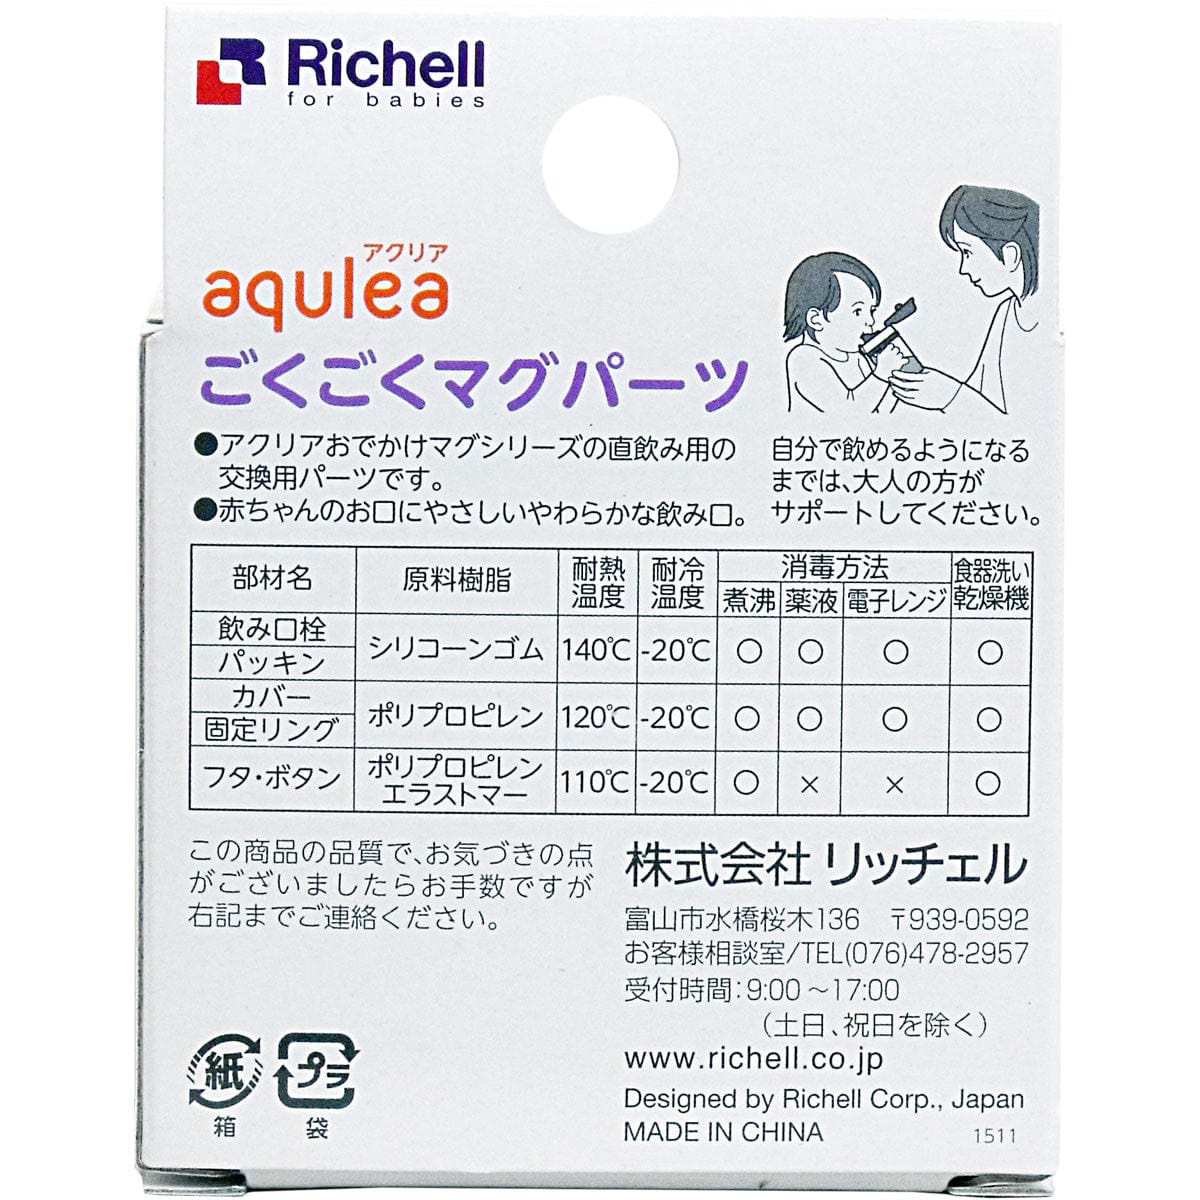 Richell - Aqulea Drinking Bottle Mug Replacement Spare Parts -  Richell Baby Spare Parts  Durio.sg